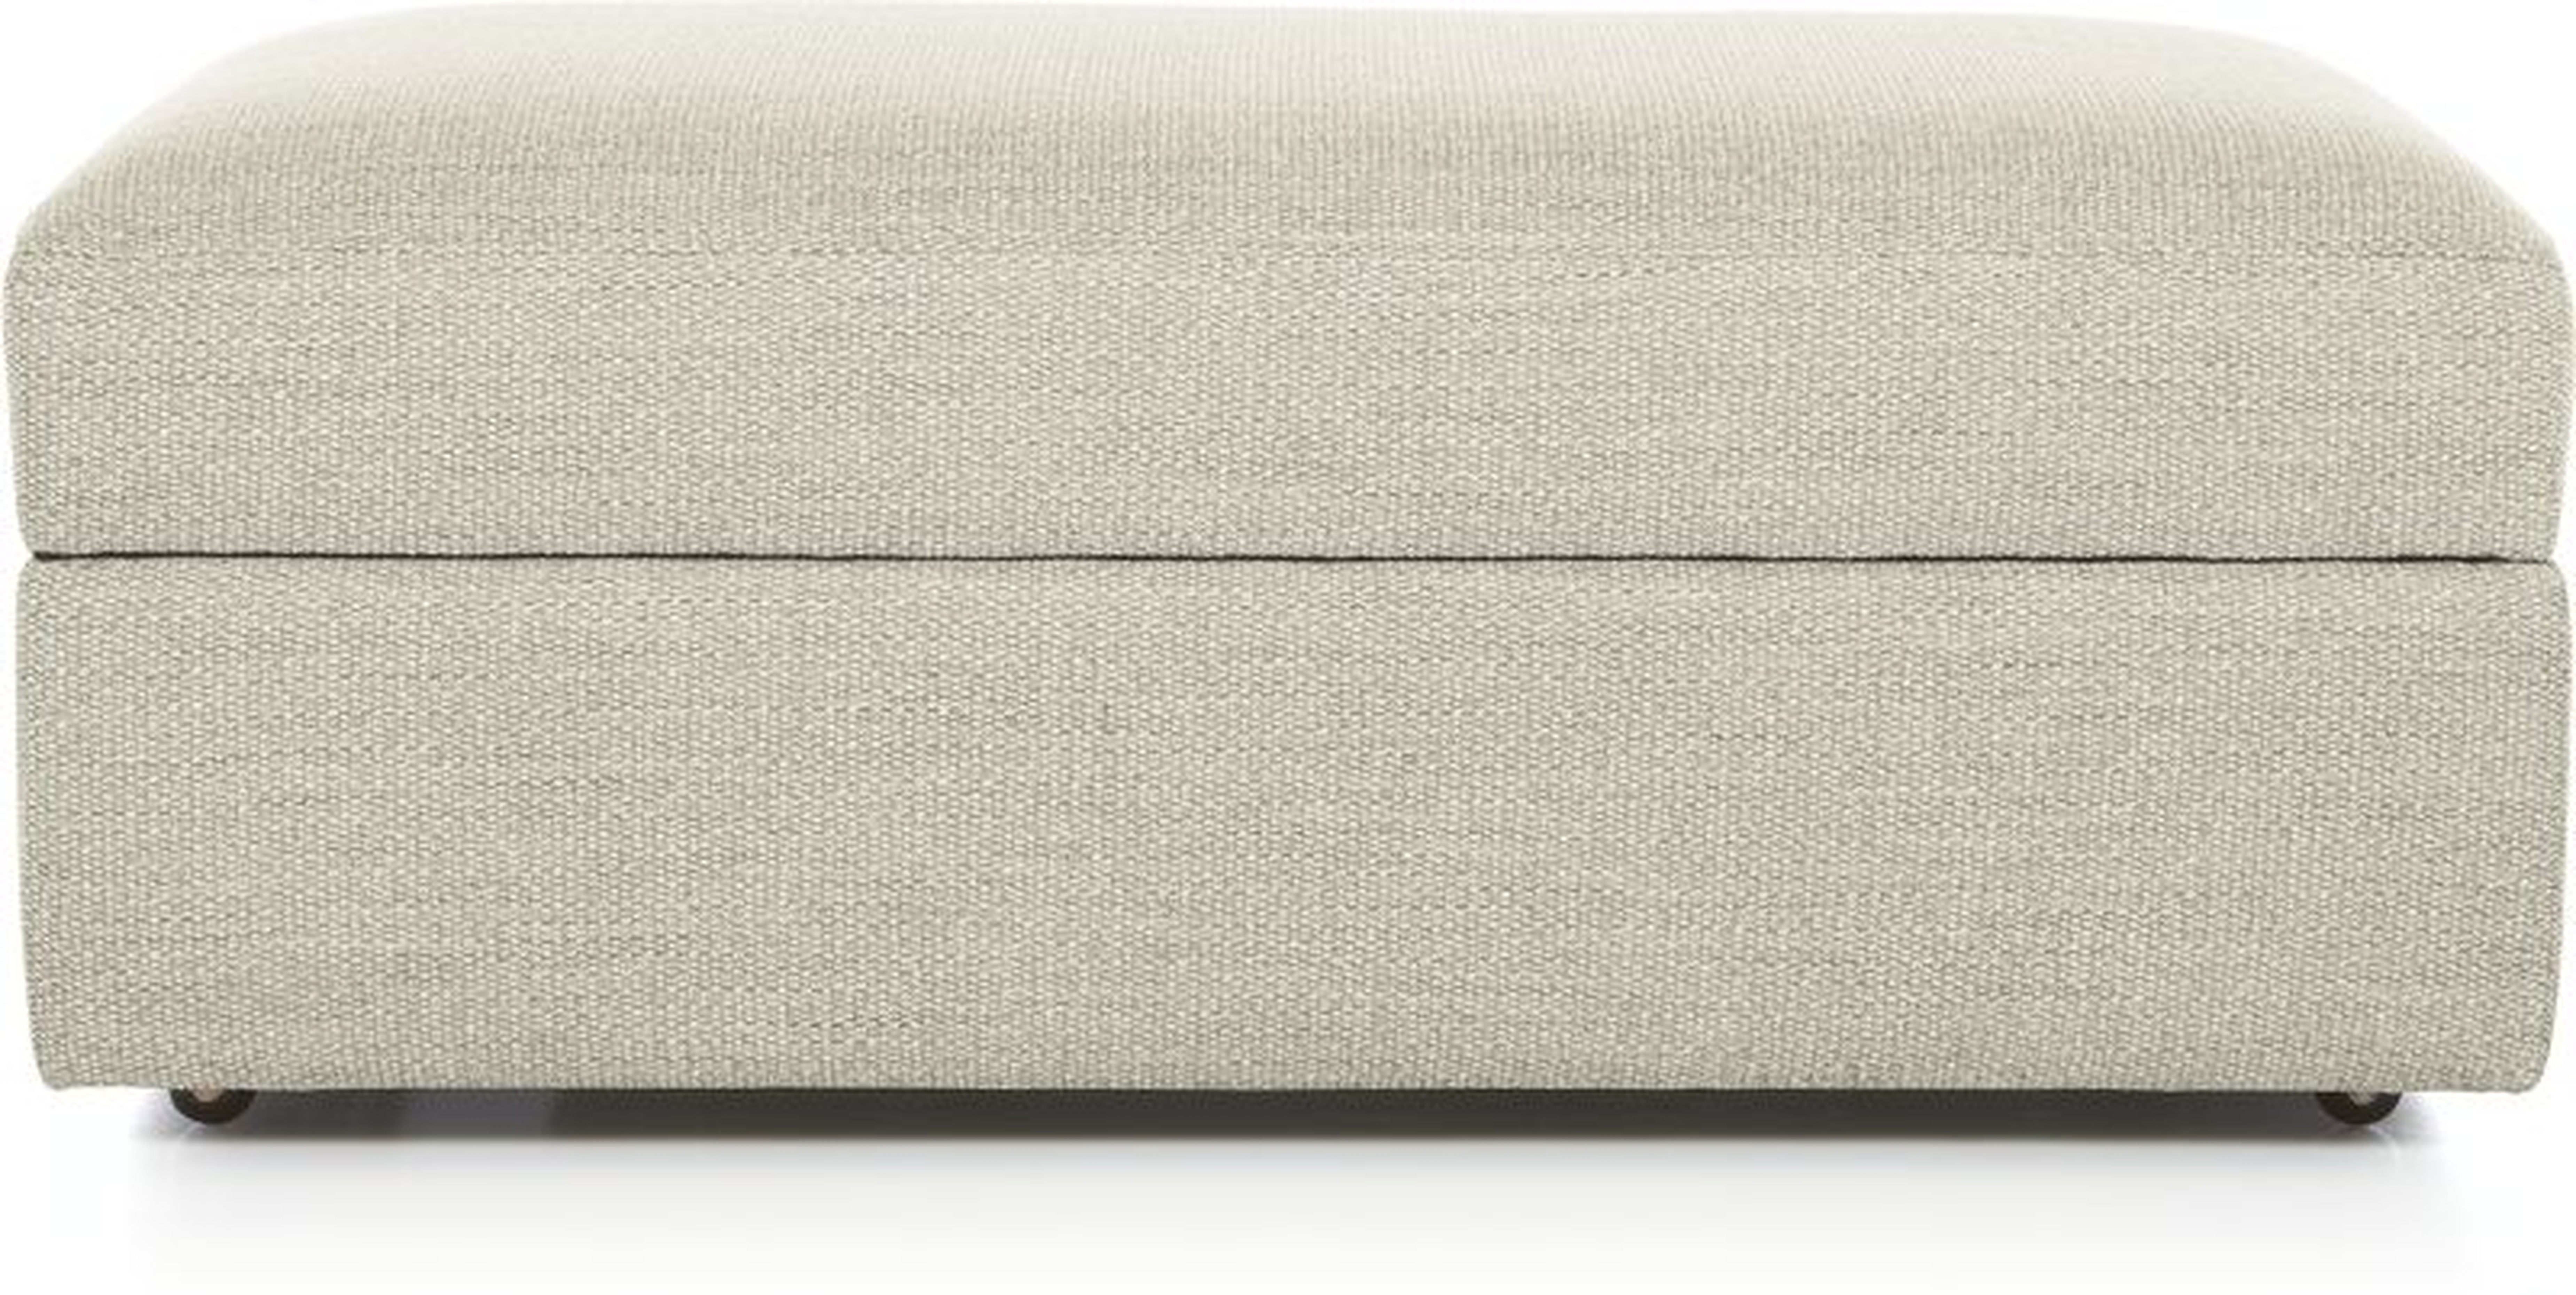 Lounge II Storage Ottoman with Casters - Taft Cement - Crate and Barrel